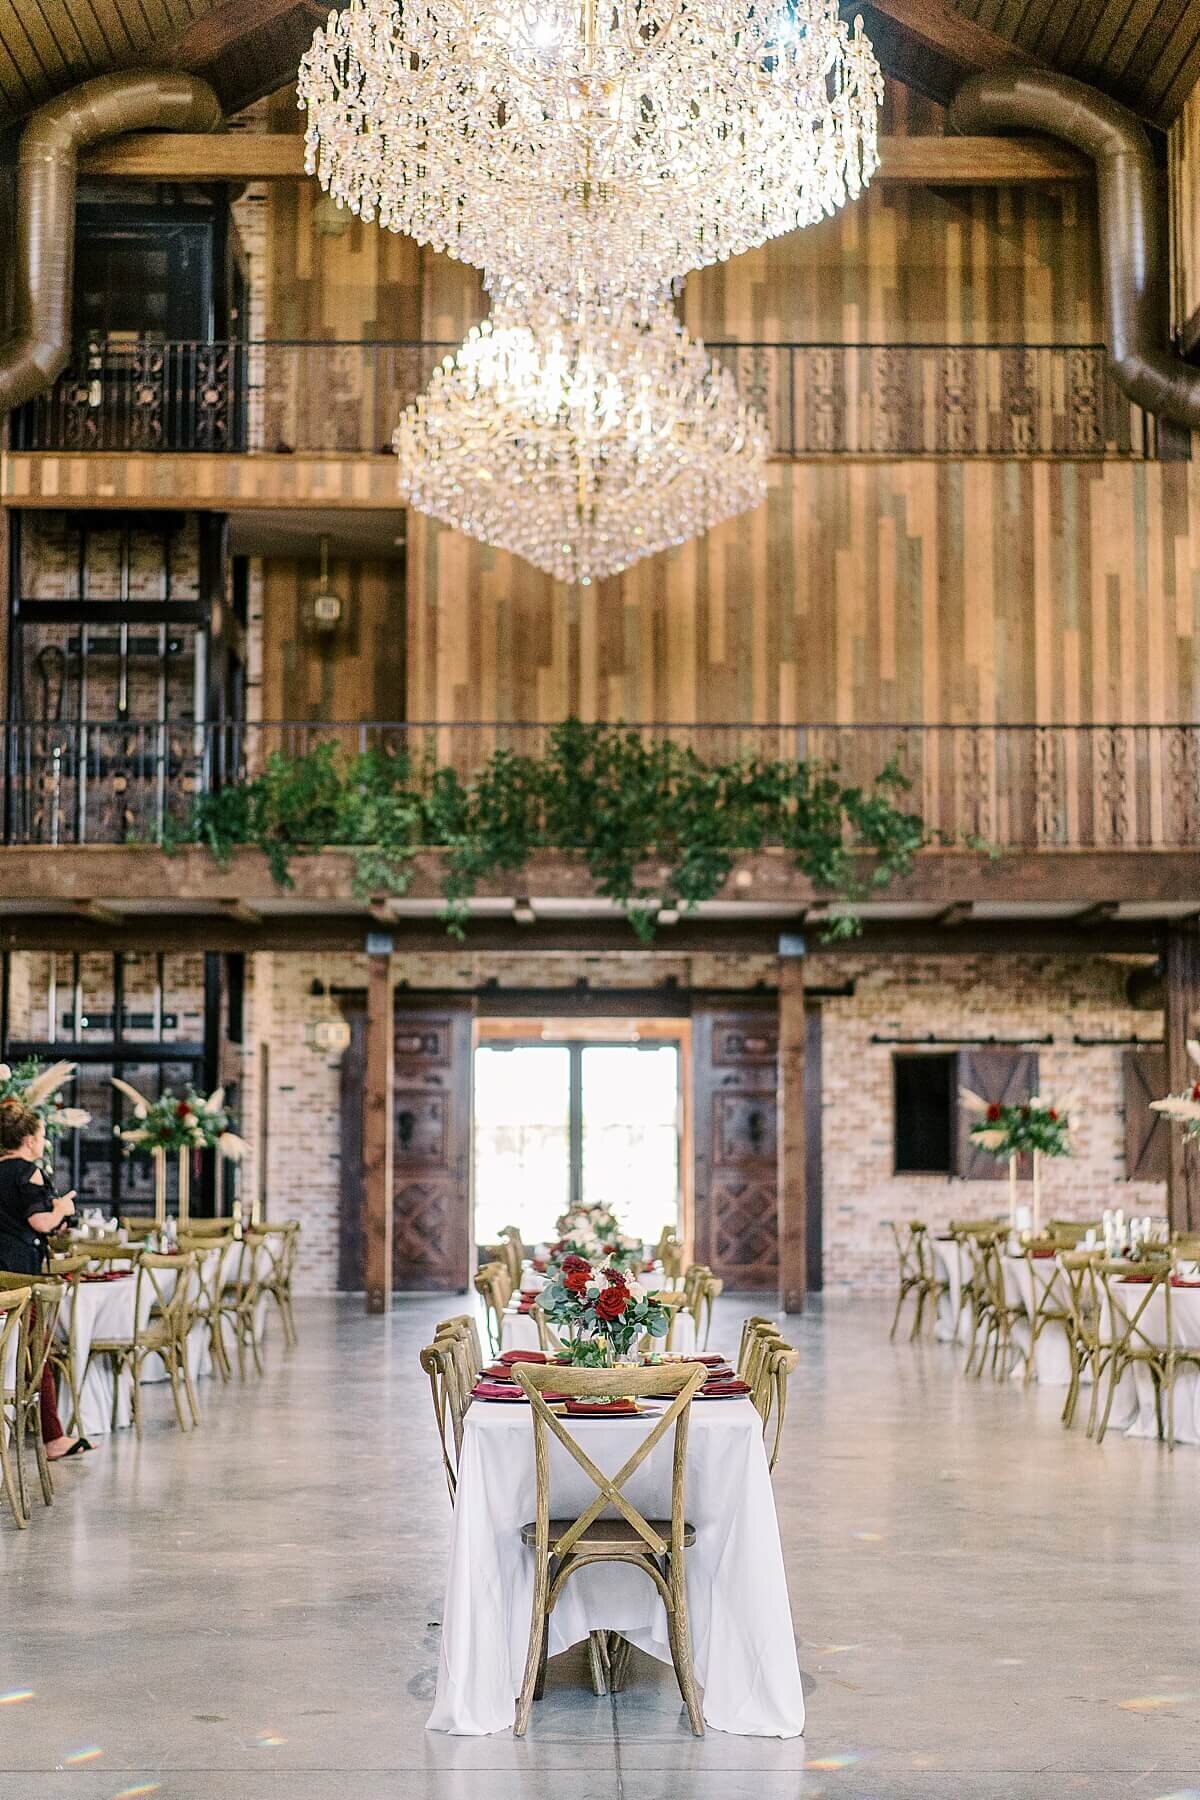 Wedding details at the Weinberg at Wixon Valley in Bryan Texas photographed by Alicia Yarrish Photography